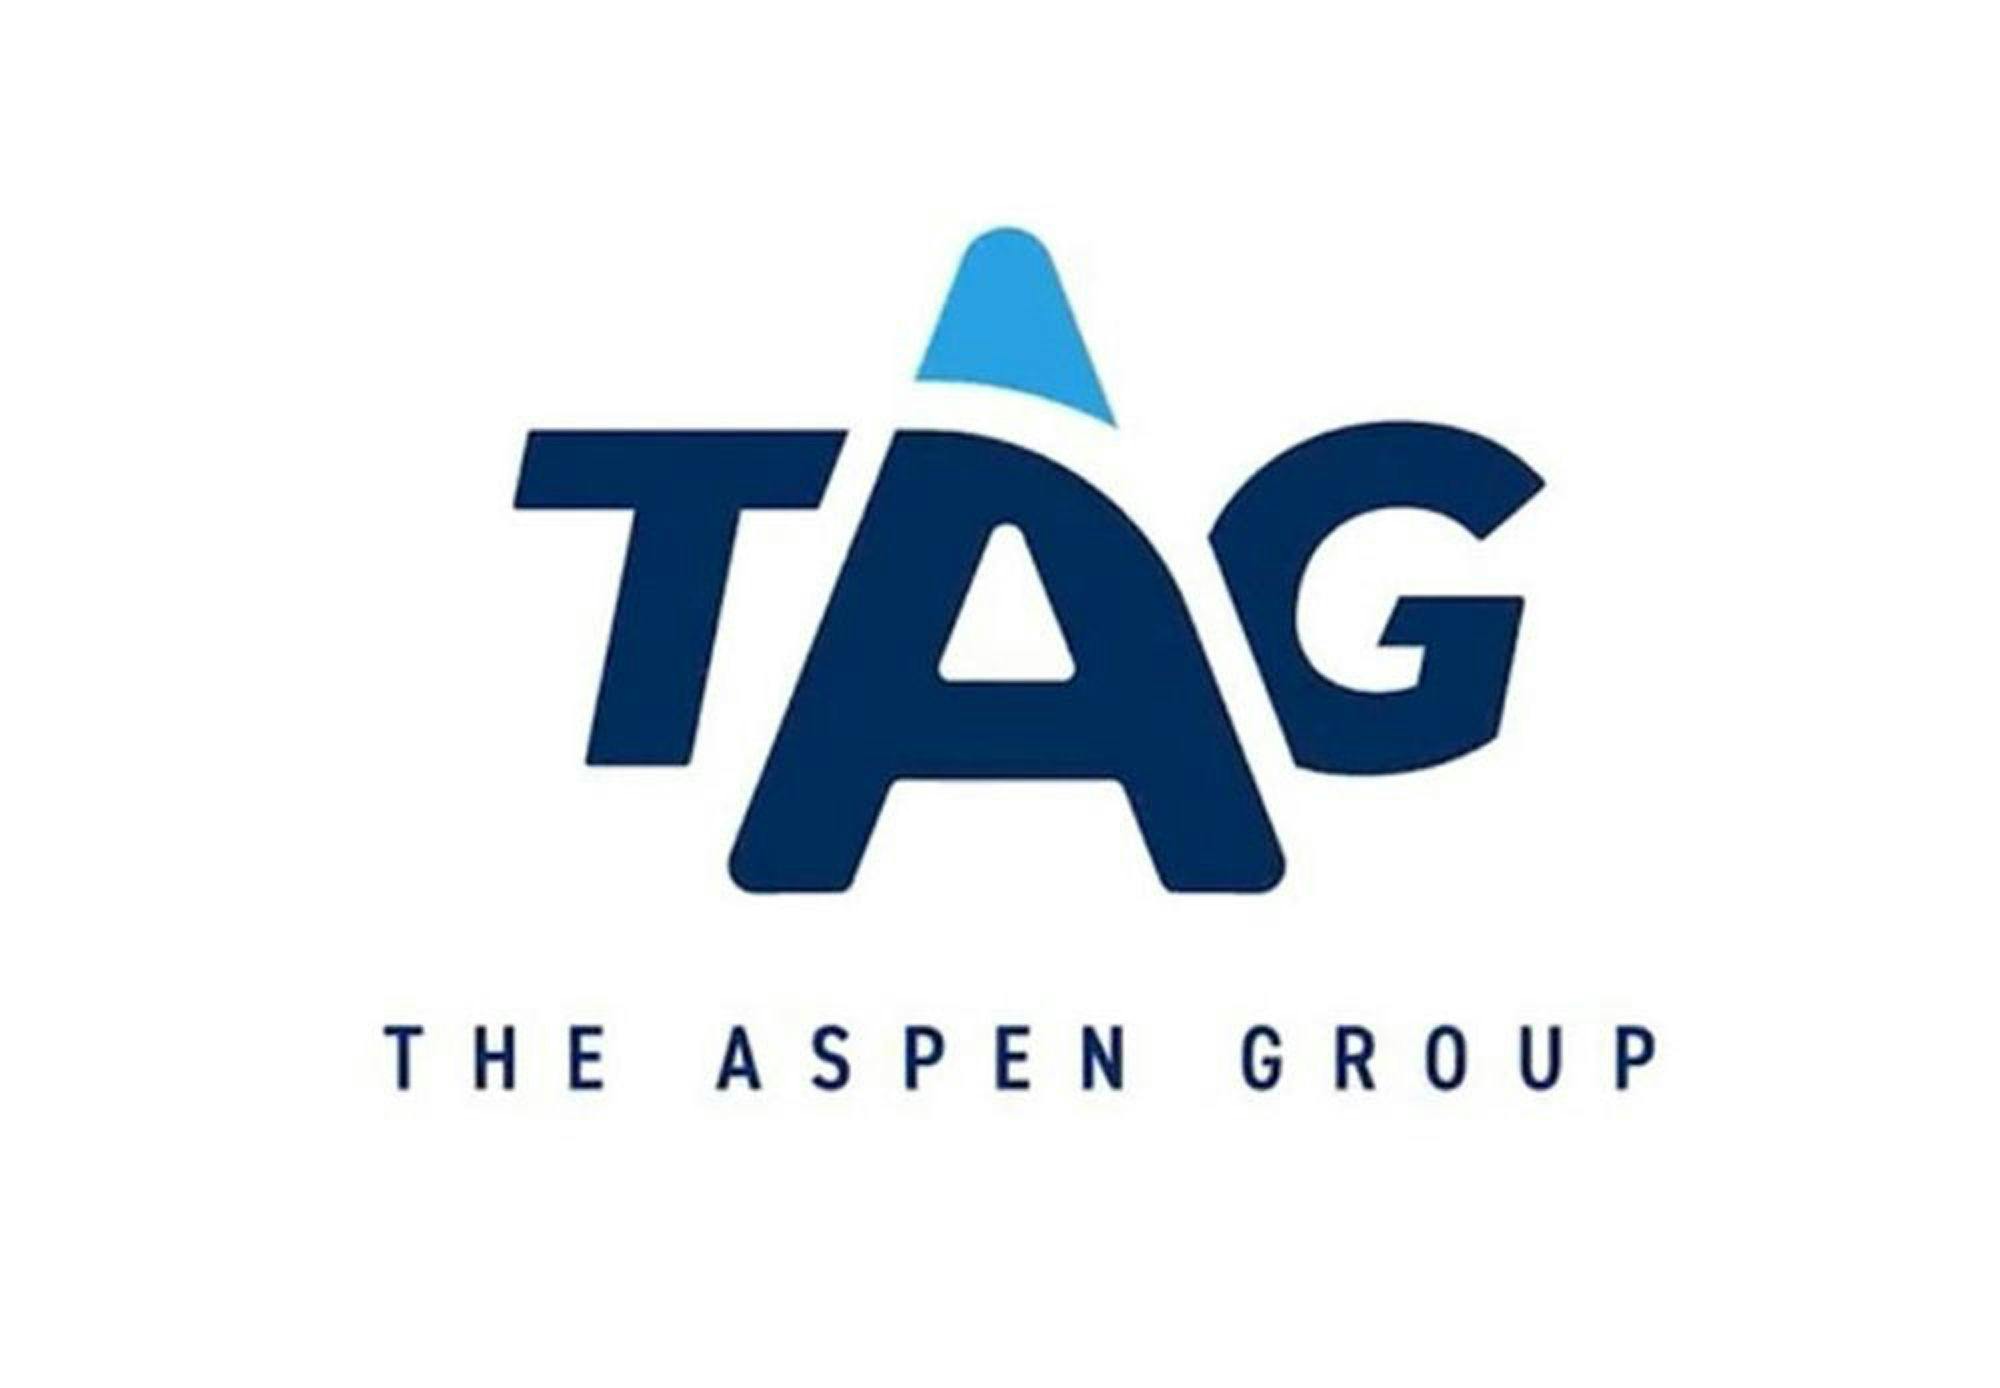 The Aspen Group Announces Plans for Oral Care Center in Illinois